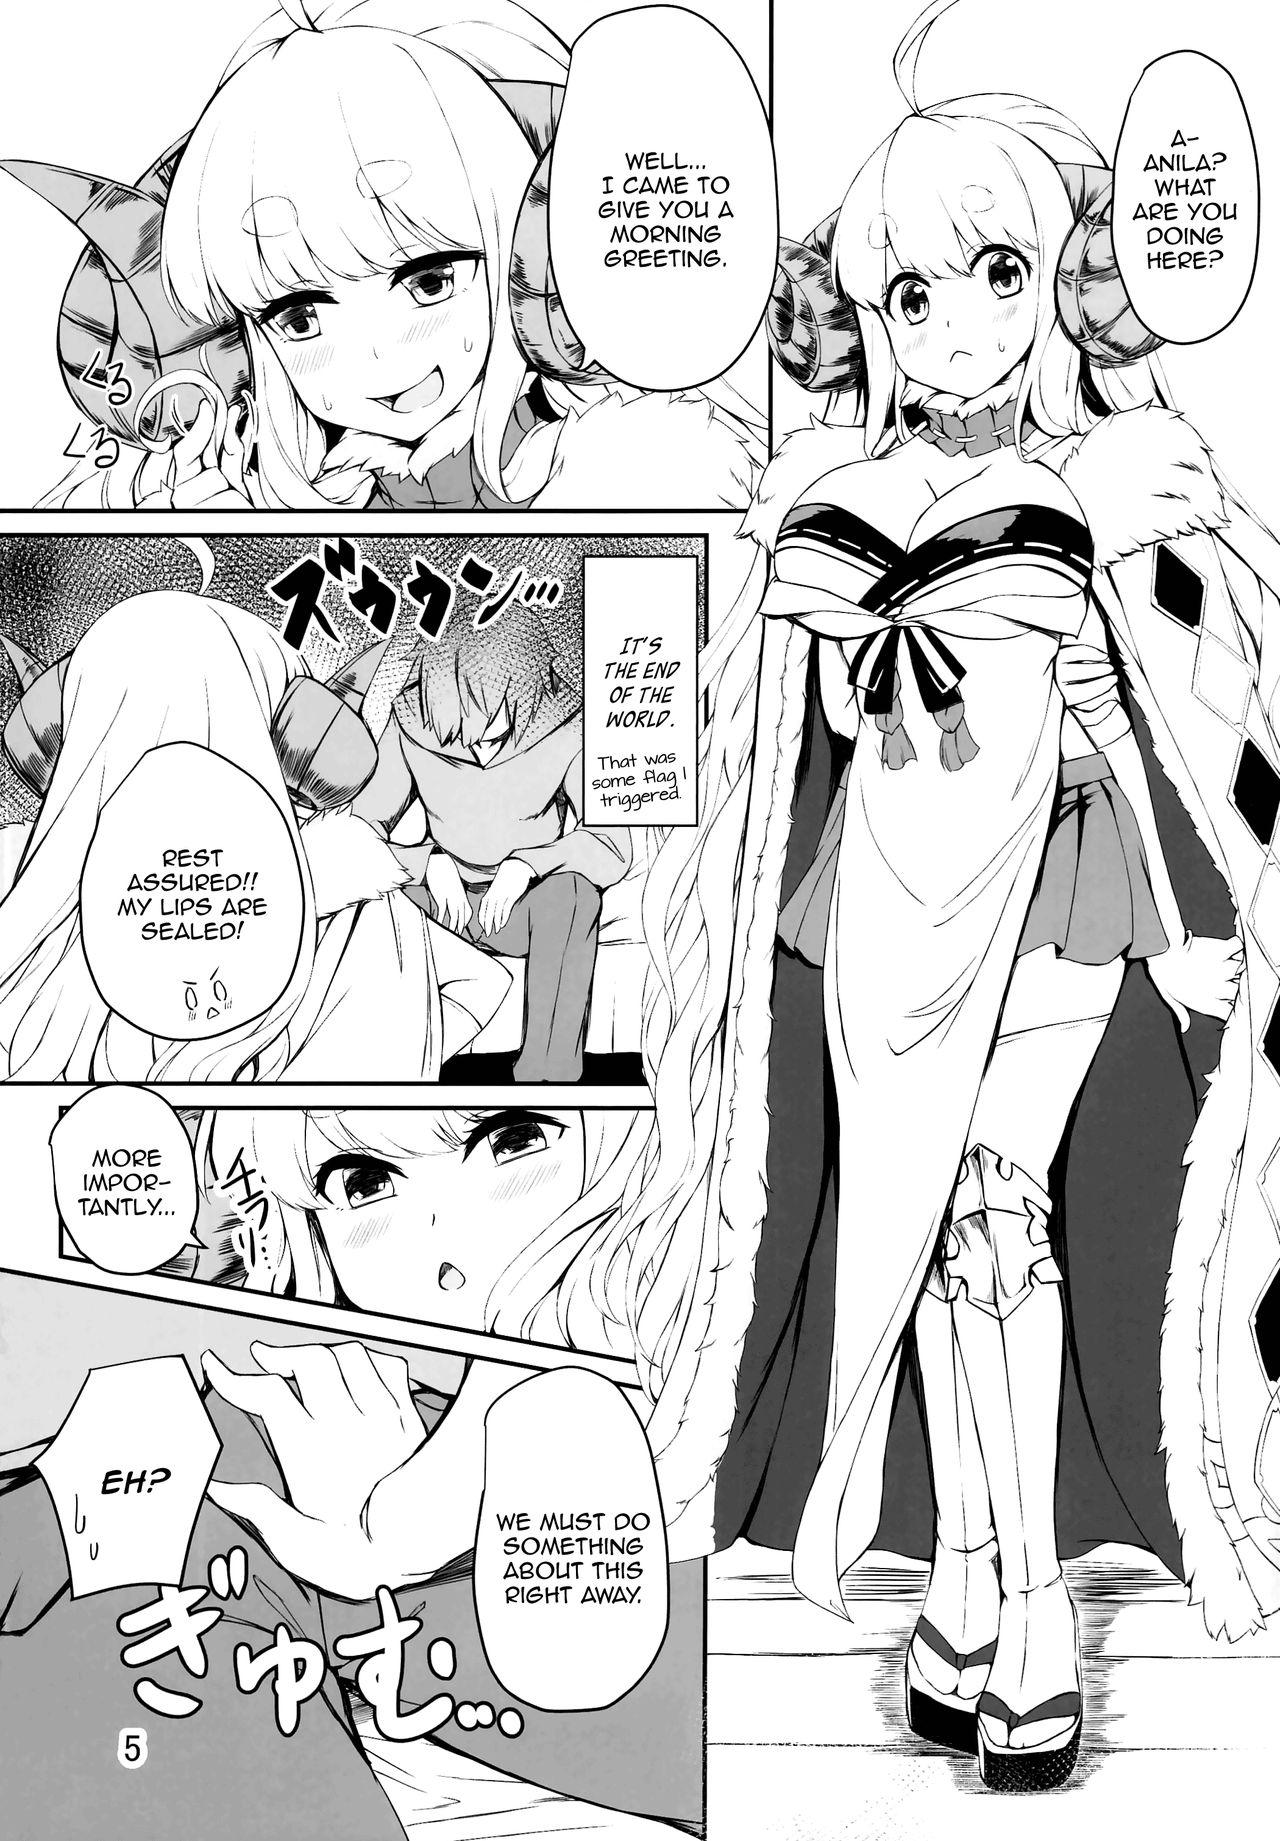 Ink Futari no Bonnou Hassan!! | Letting Out Their Desires!! - Granblue fantasy Farting - Page 5